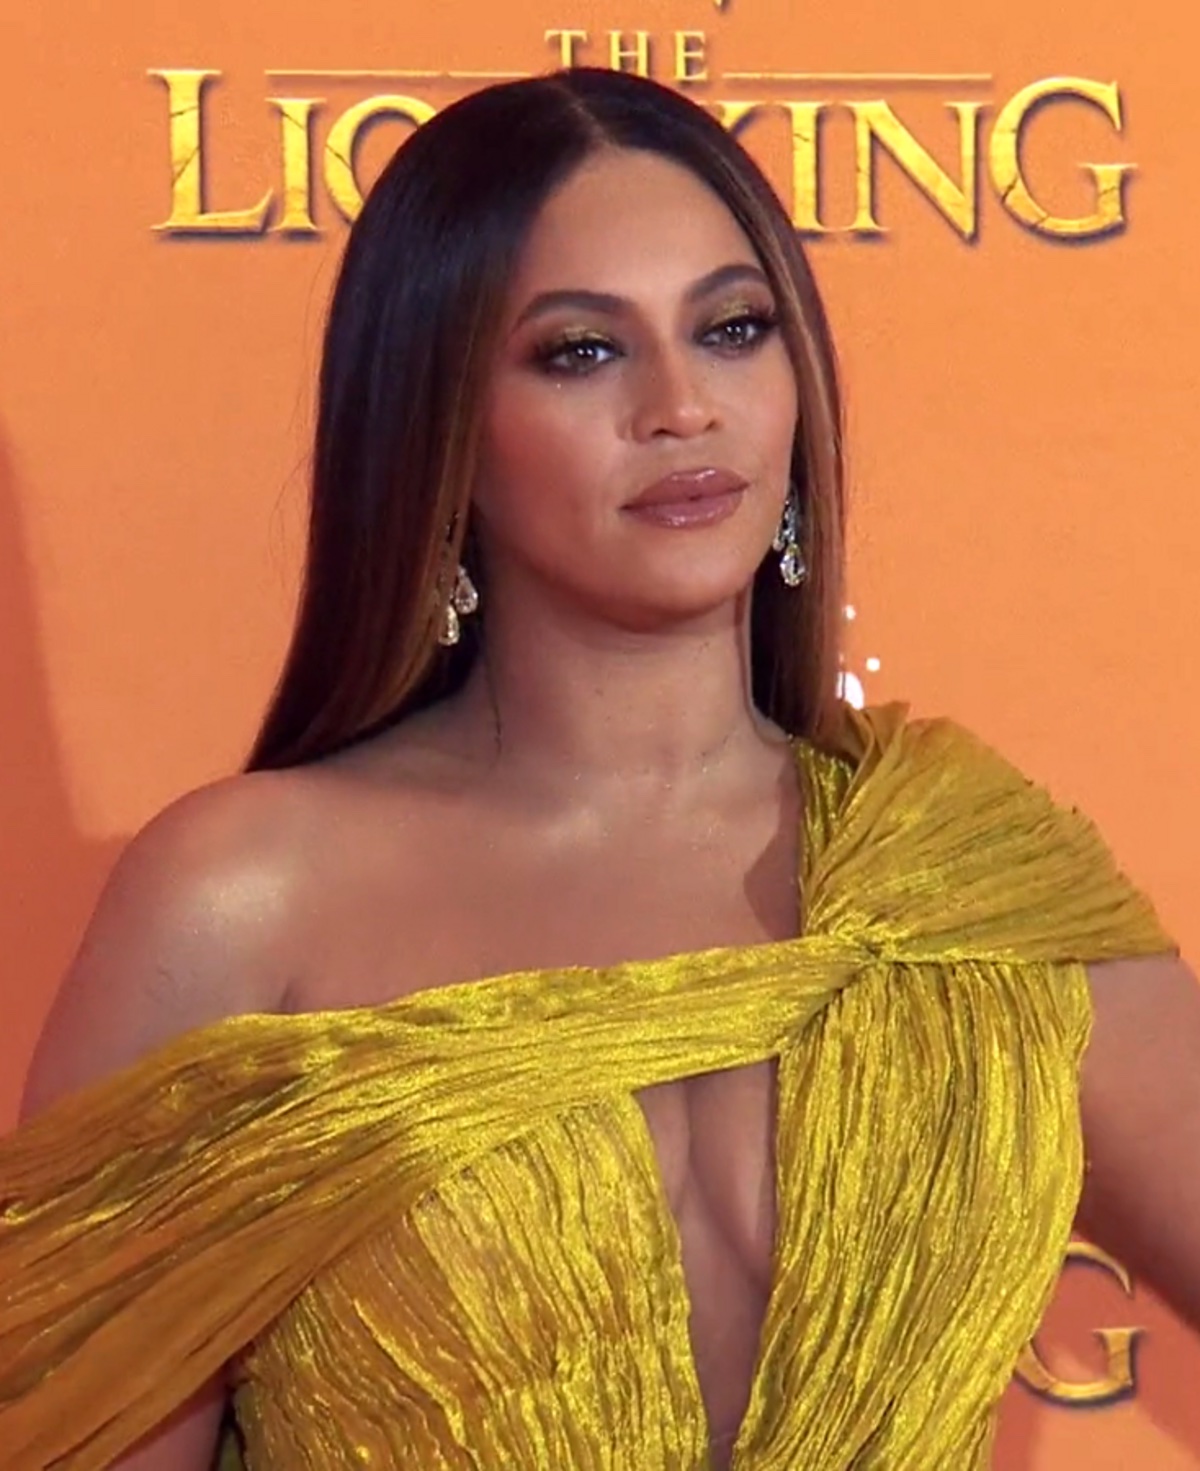 Beyoncé - source Par Sassy — Vimeo: The Lion King European Premiere (view archived source), CC BY 3.0, https://commons.wikimedia.org/w/index.php?curid=86494994